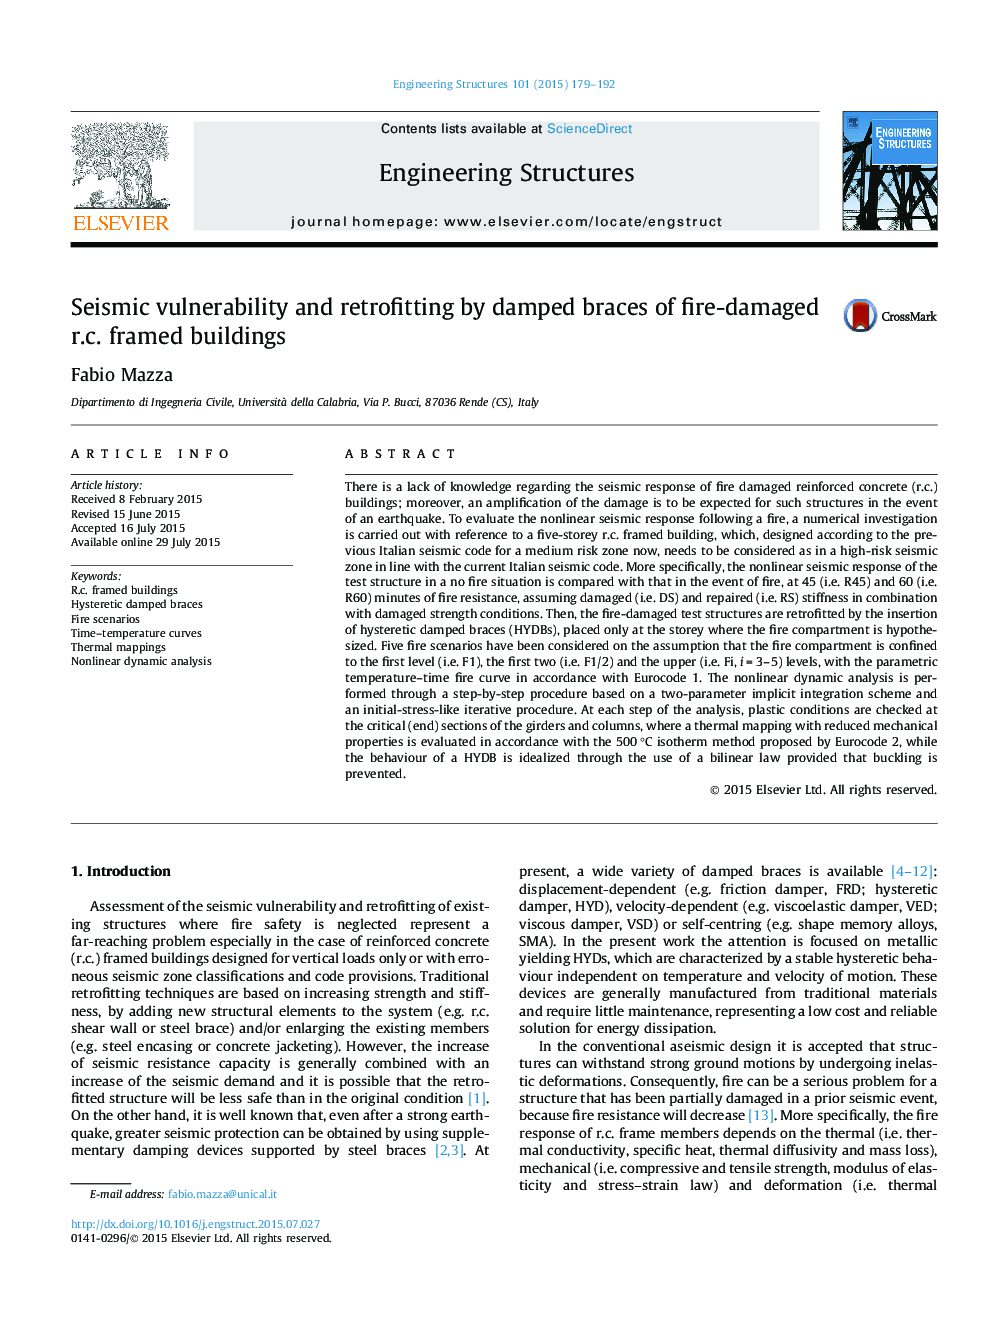 Seismic vulnerability and retrofitting by damped braces of fire-damaged r.c. framed buildings